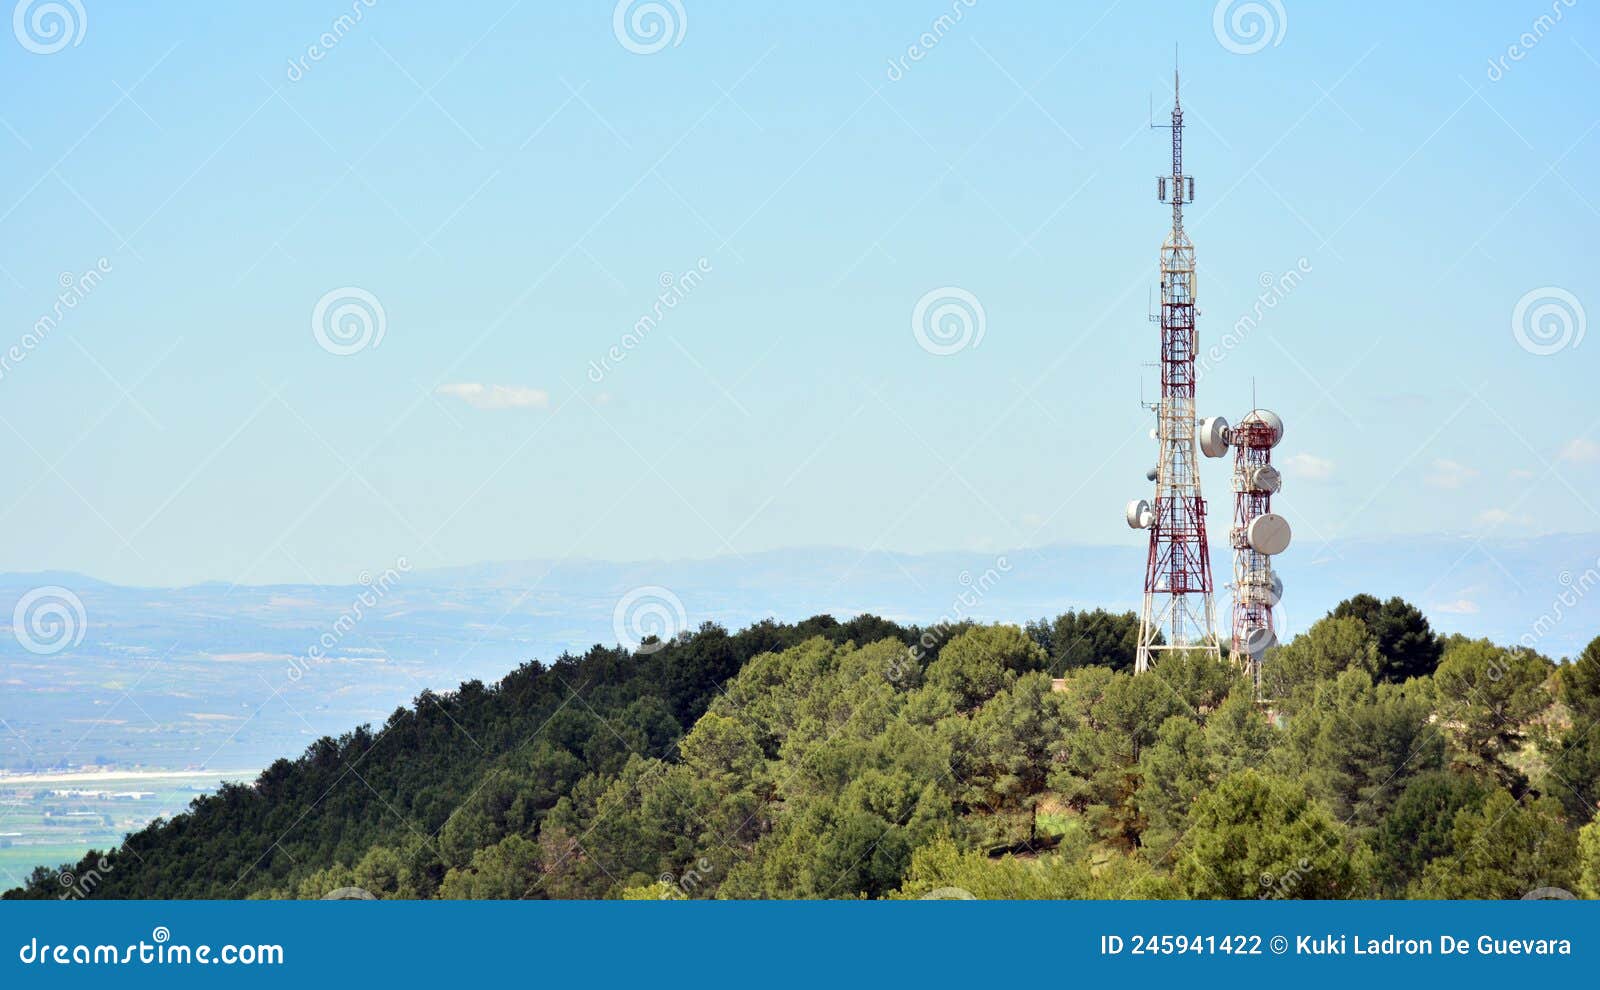 telecommunications tower with multiple antennas